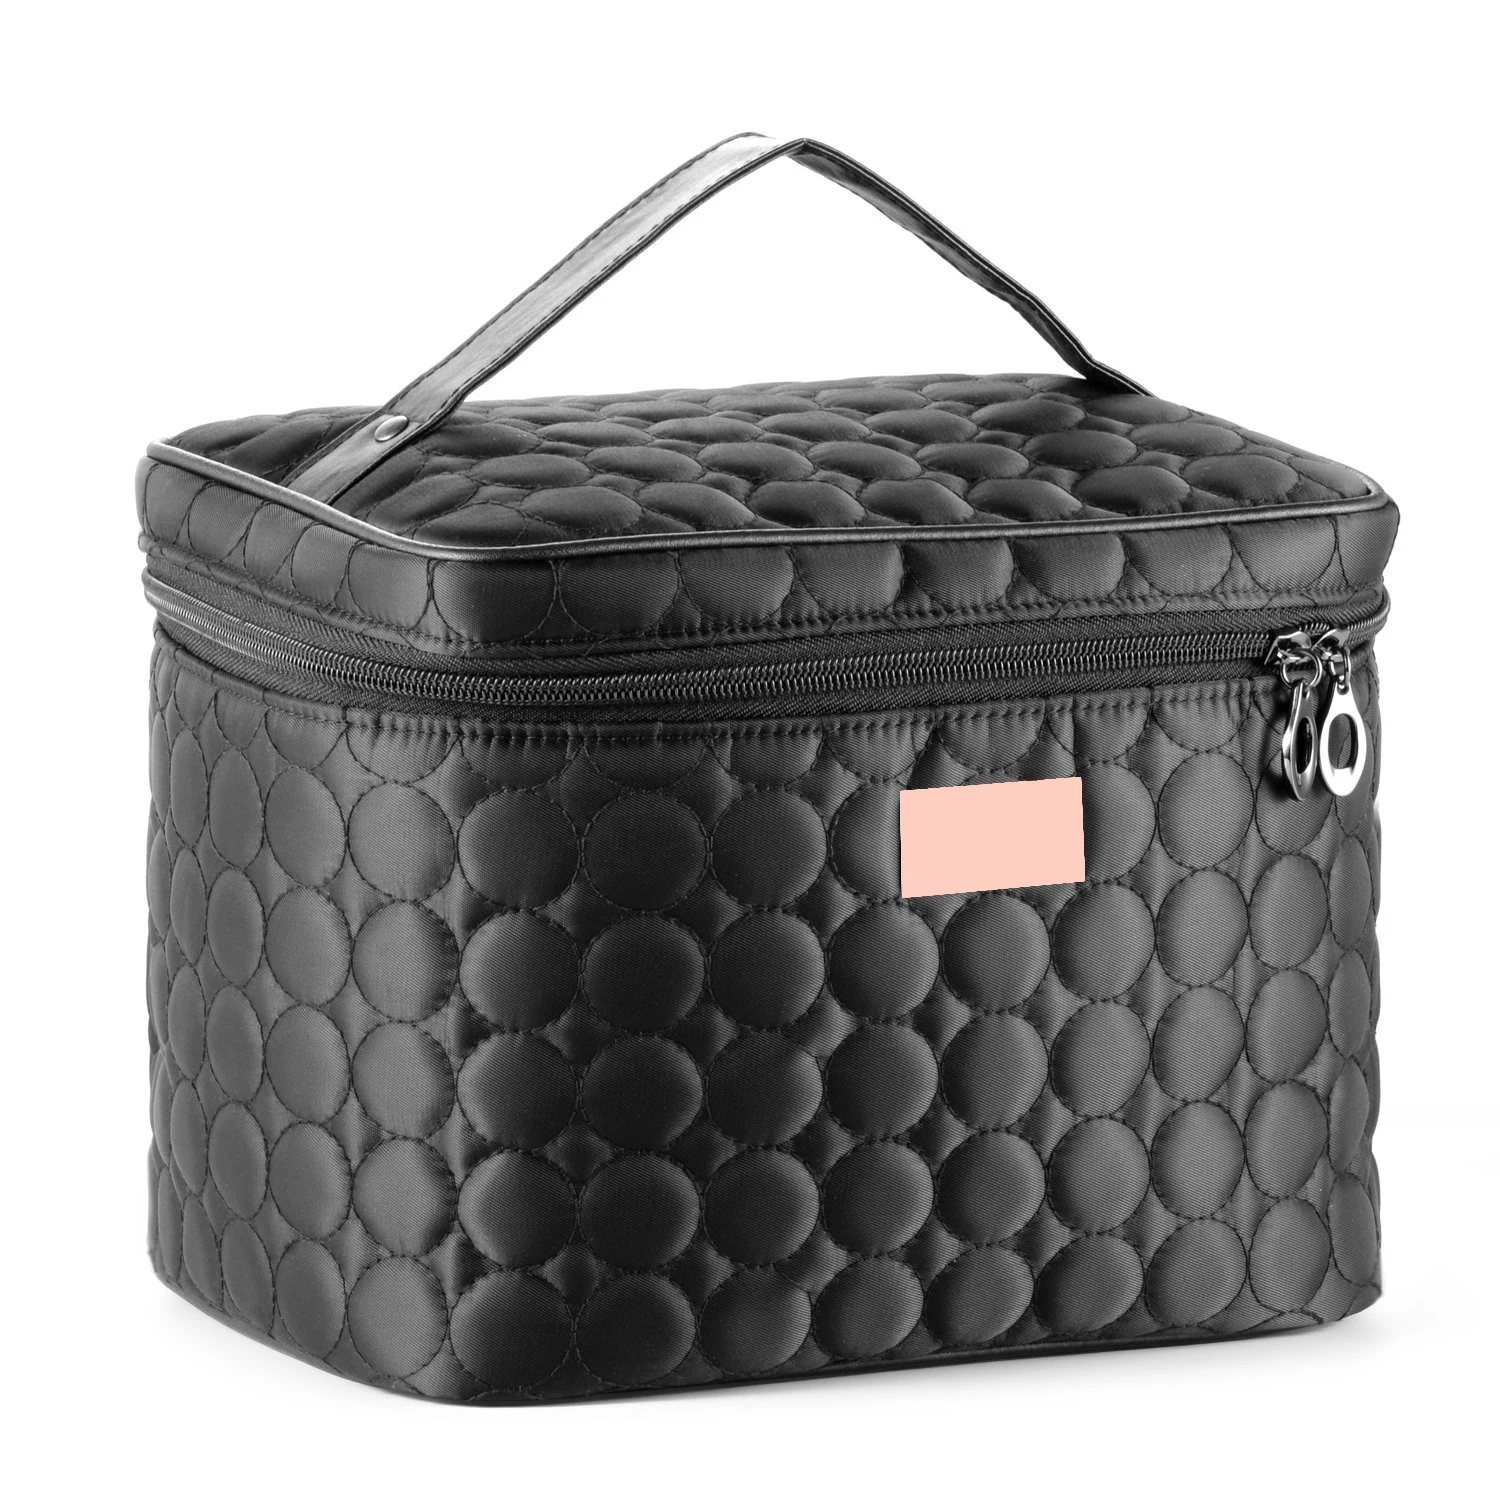 New Quilted Makeup Bags Cosmetic Bags Cases - Buy Cosmetic Bags Cases ...